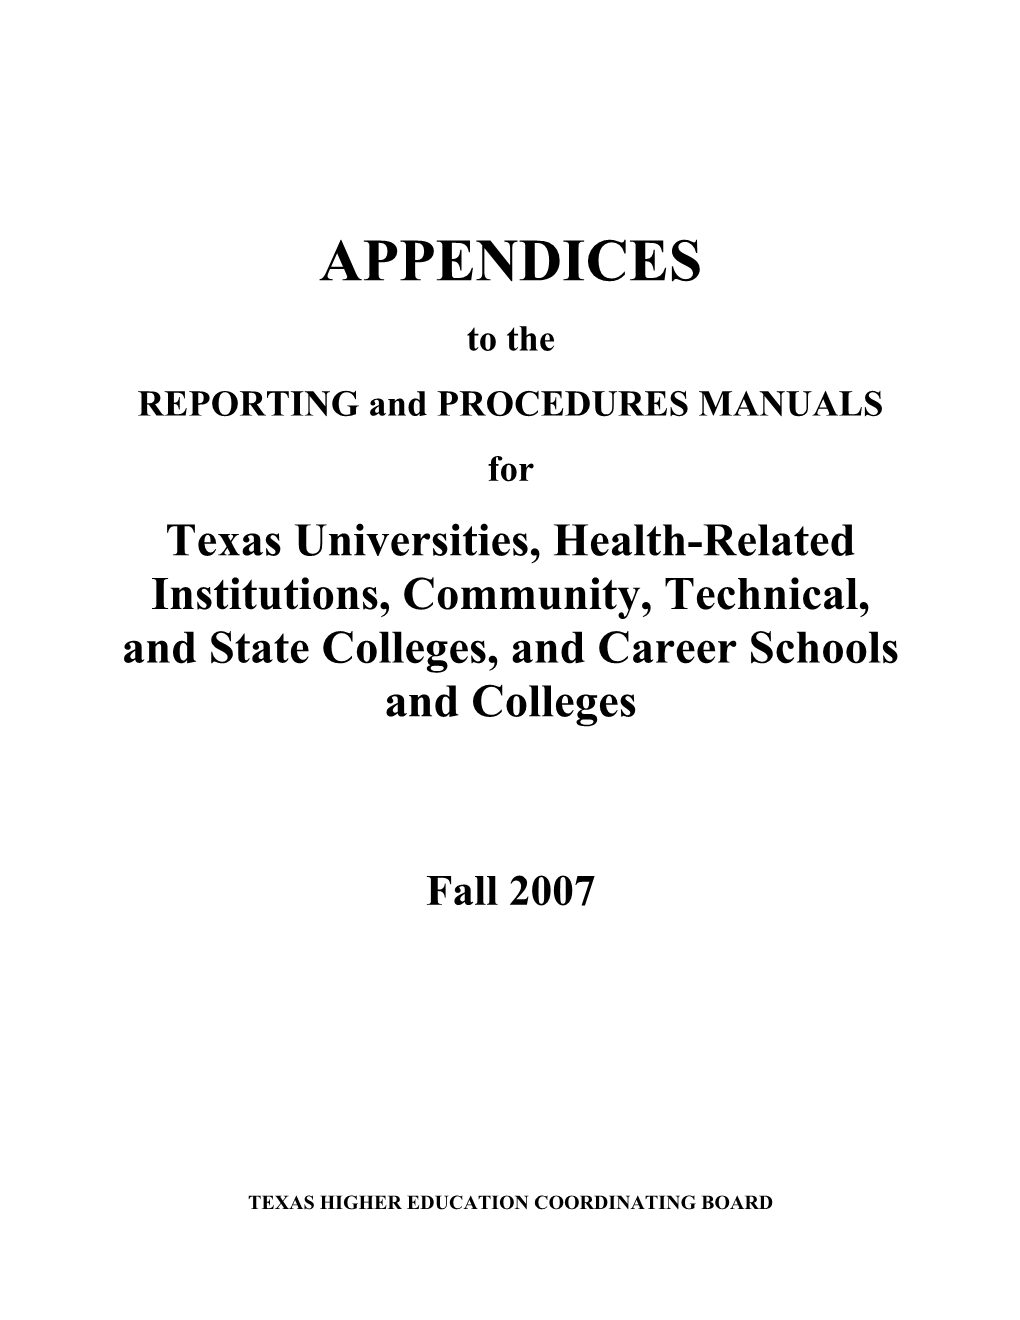 Appendices to the Reporting and Procedures Manual for Texas Universities, Health-Related